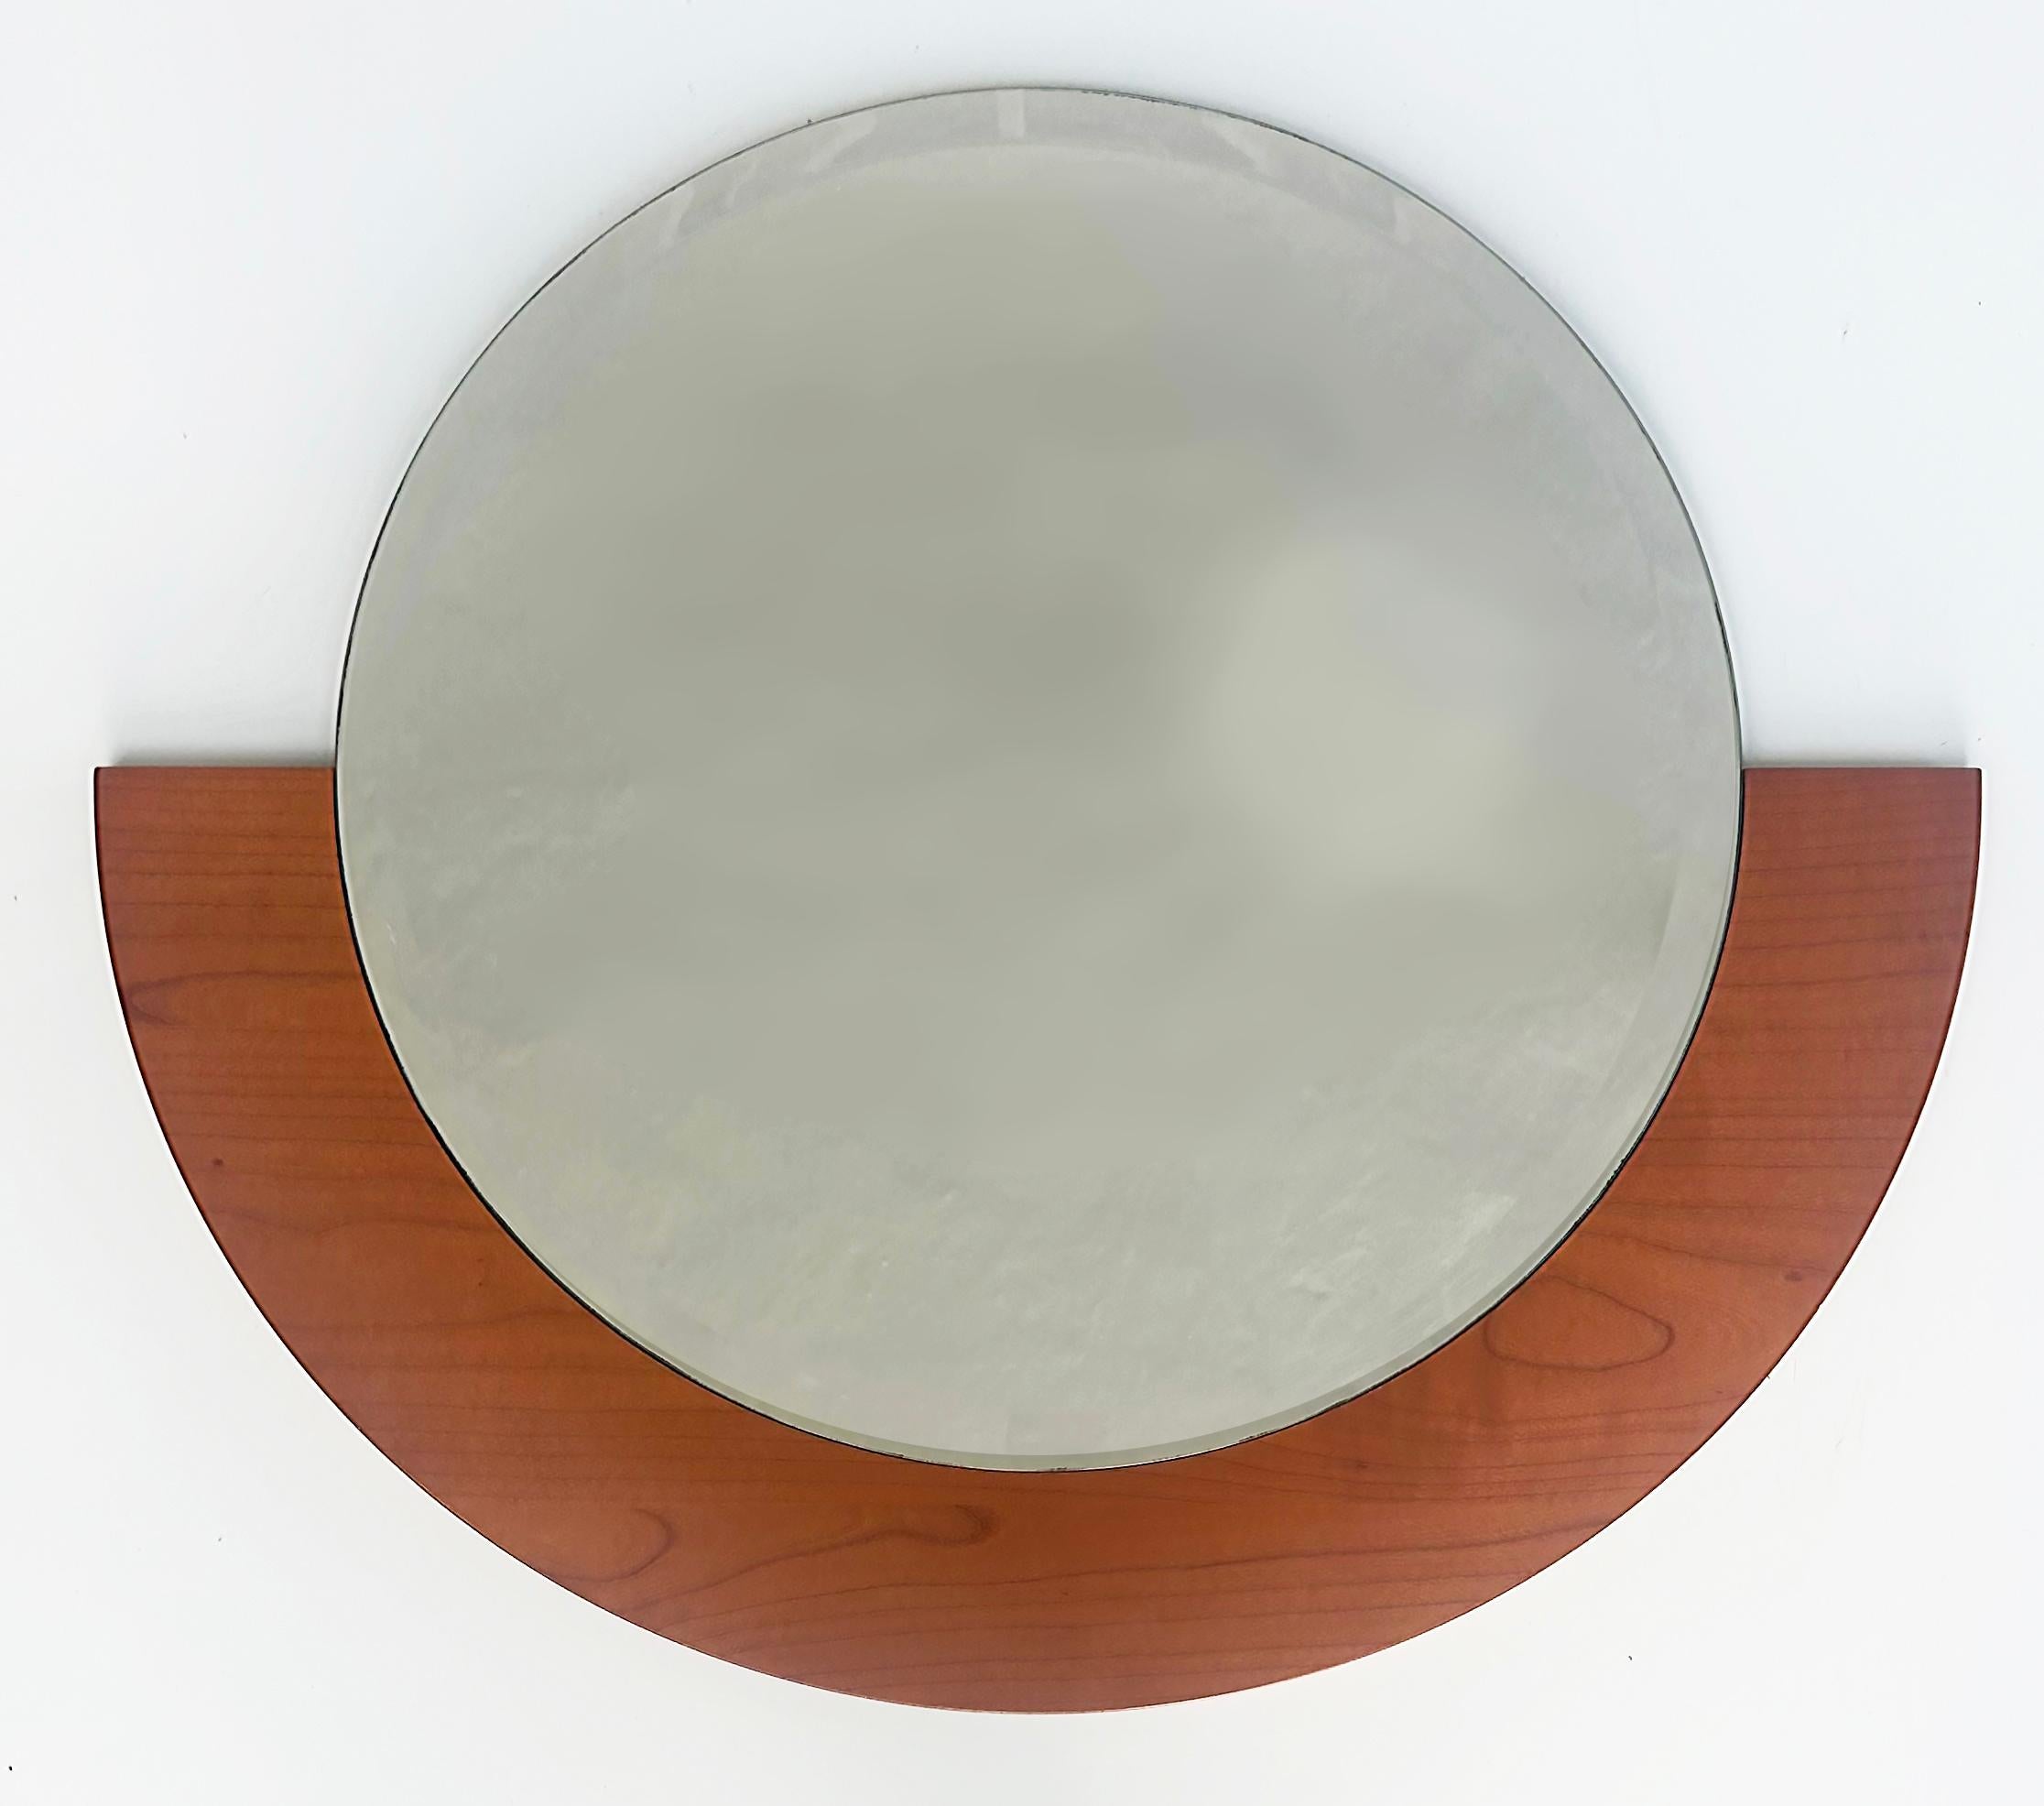 Beveled Wall Mirror with Wood Frame

Offered for sale is a beveled wall mirror with a blonde wood frame. The round beveled mirror rests upon the half-circle lower framed.